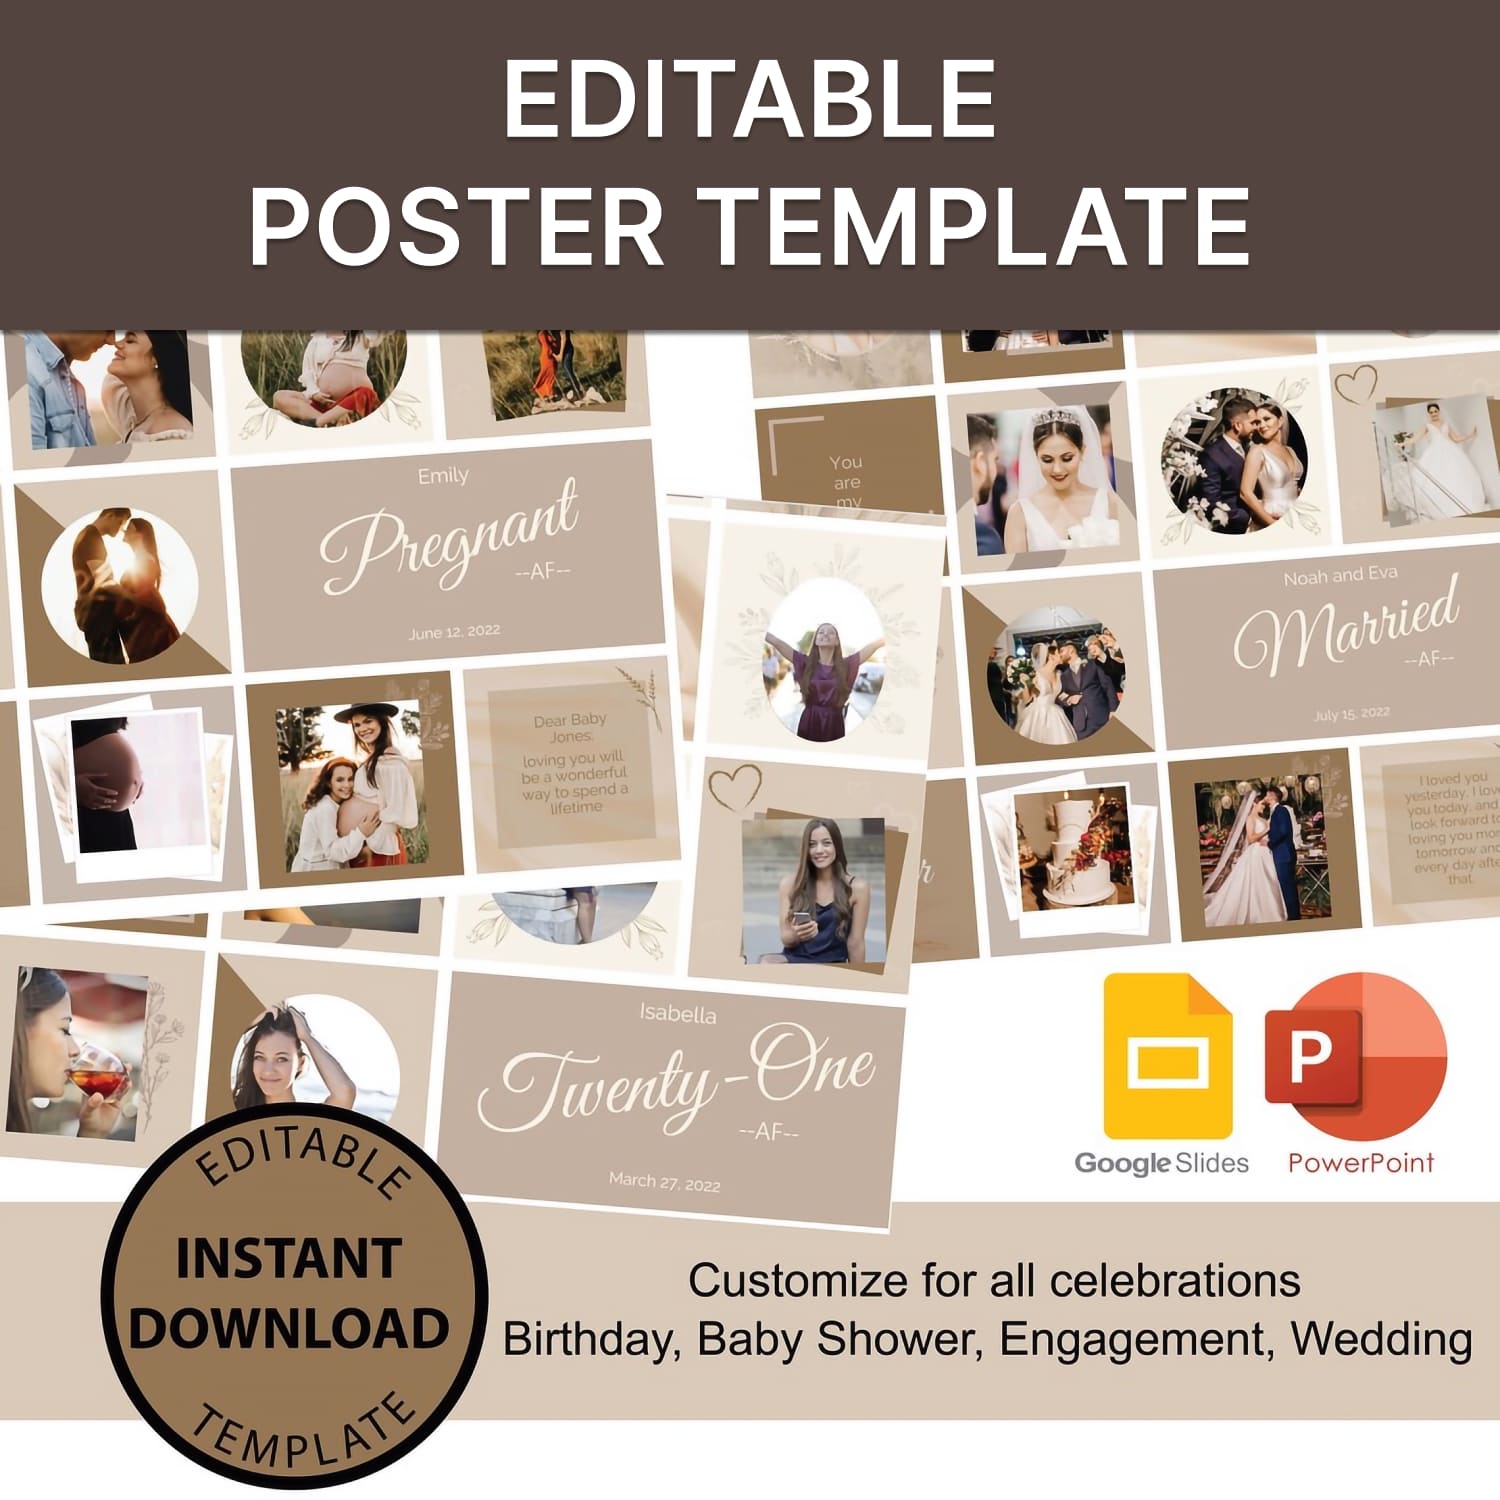 Editable Poster Template, Digital Download, Instant Access, Personalize & Customize With Own Text And Photos In Powerpoint Or Google Slides.